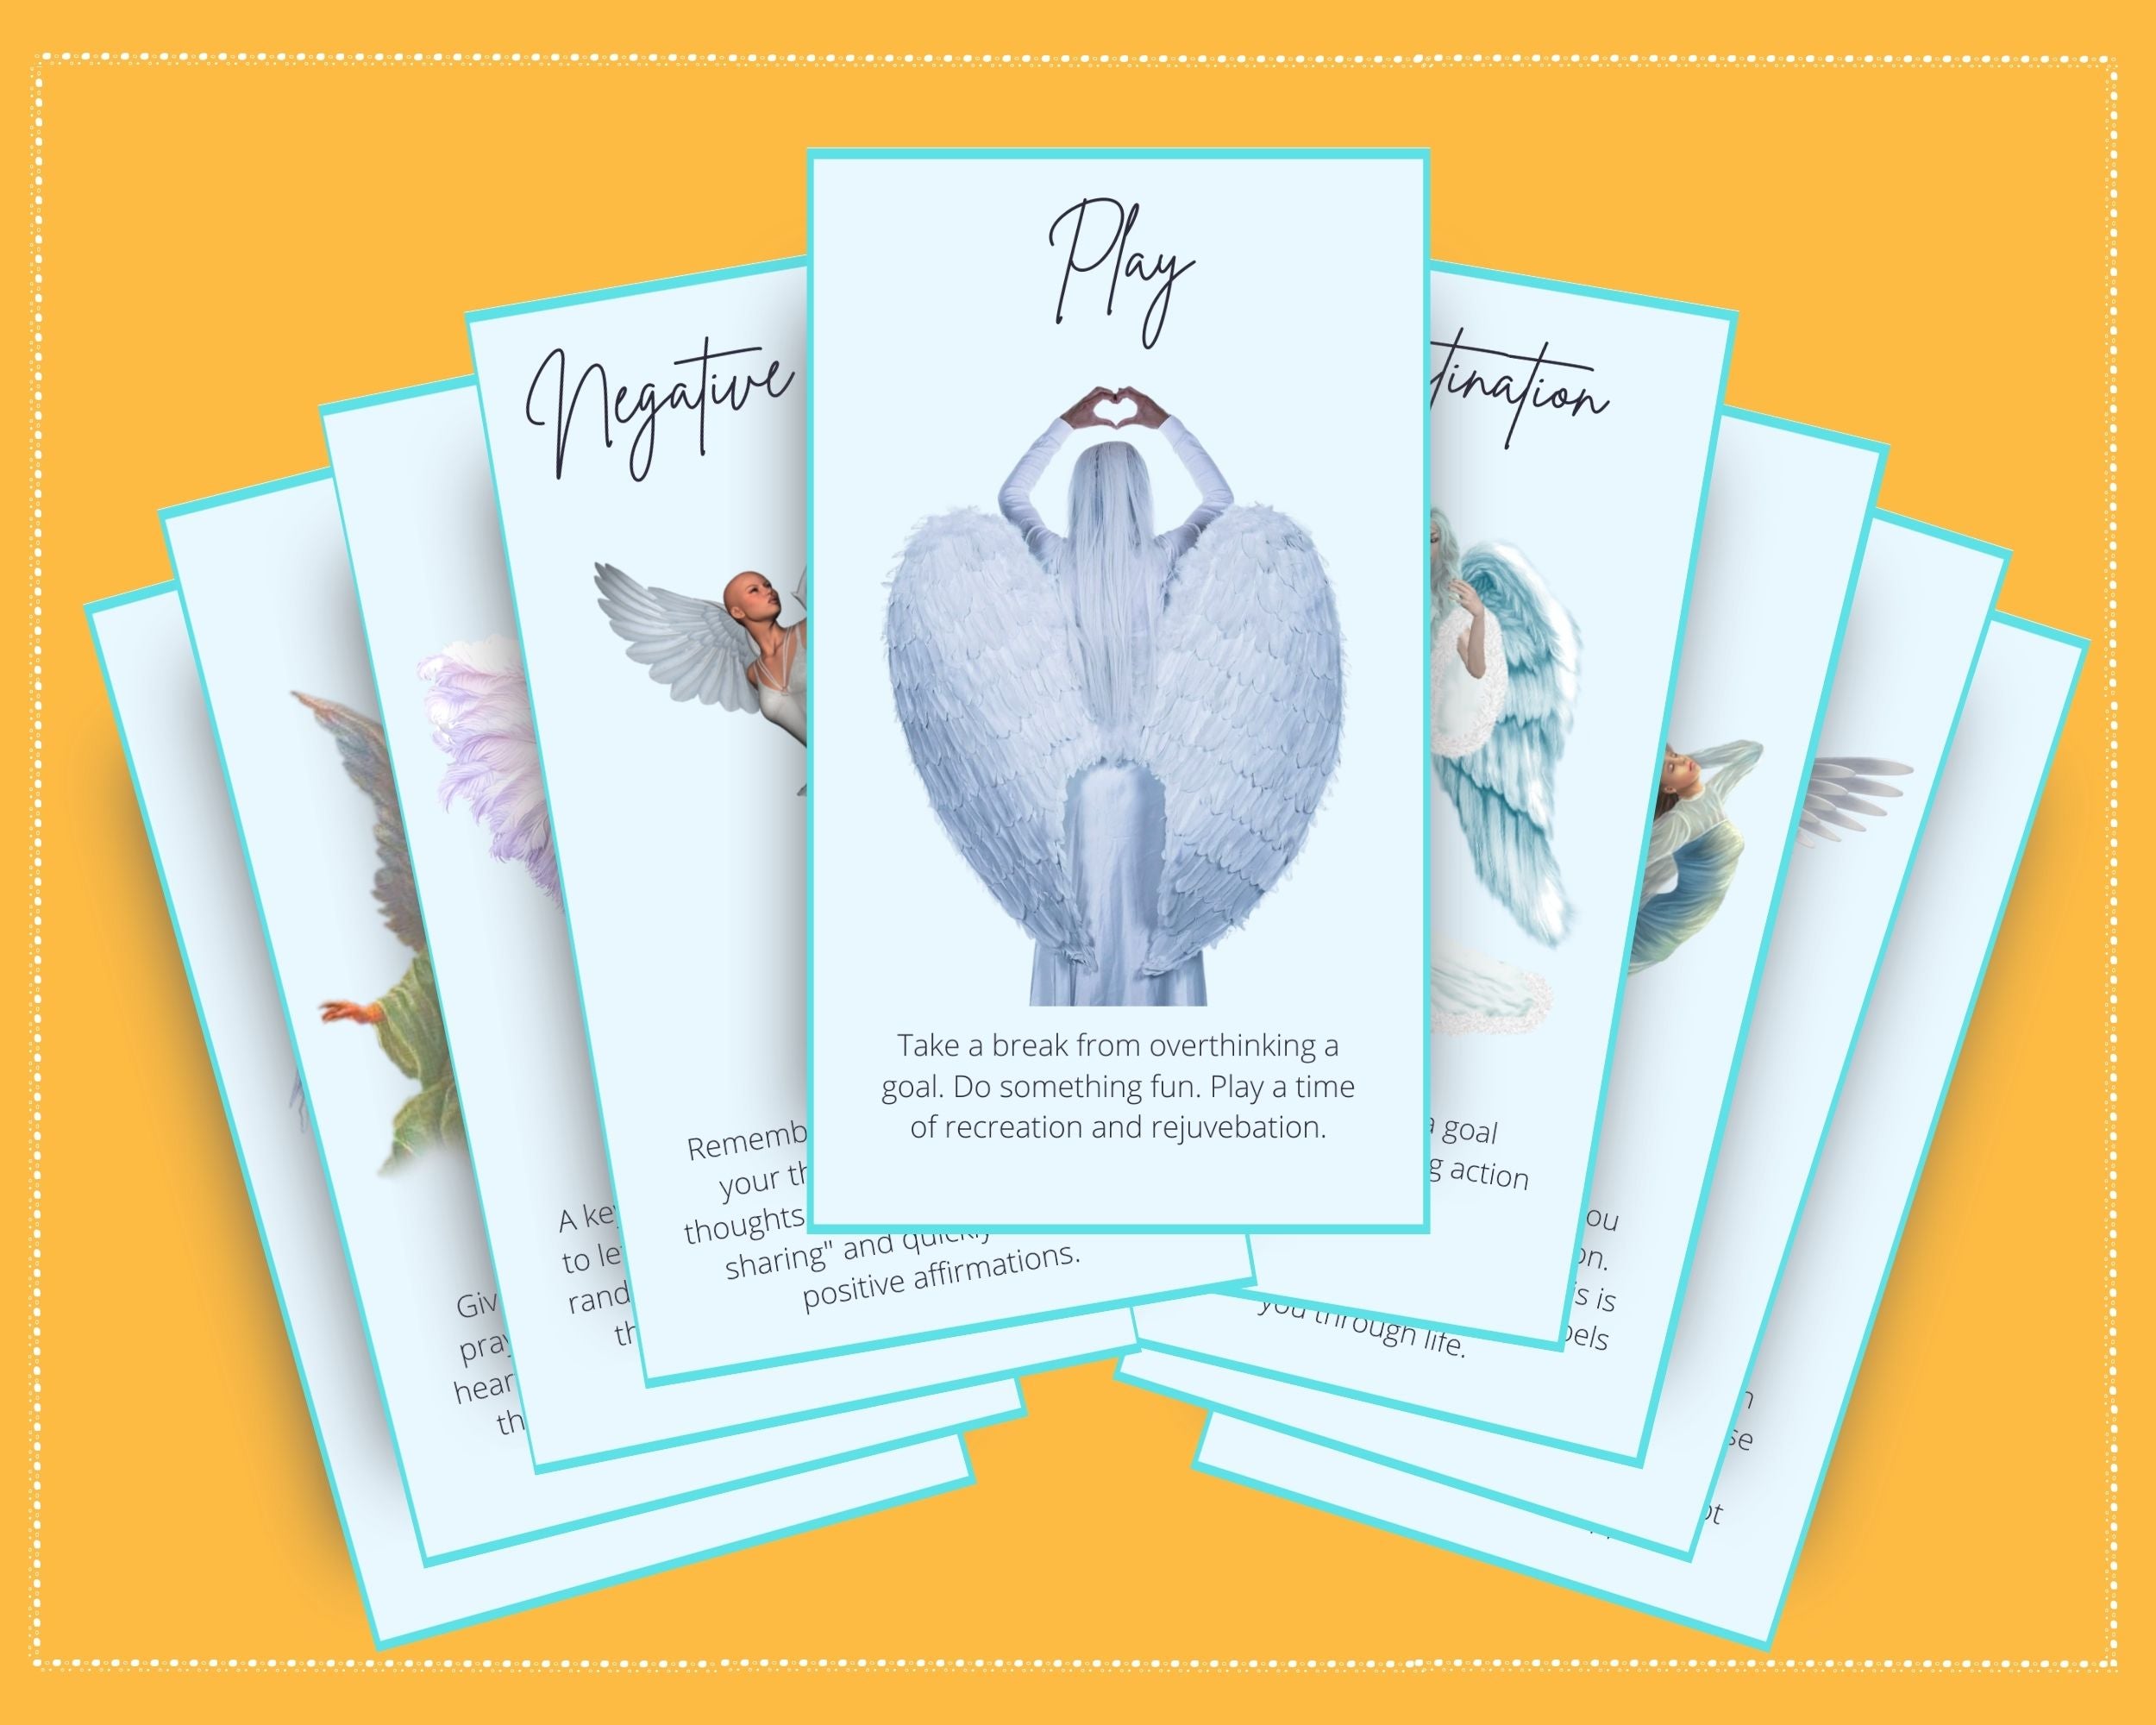 Messages from Guardian Angels Oracle Card Deck | Editable 44 Card Deck in Canva | Size 2.75"x 4.75" | Commercial Use